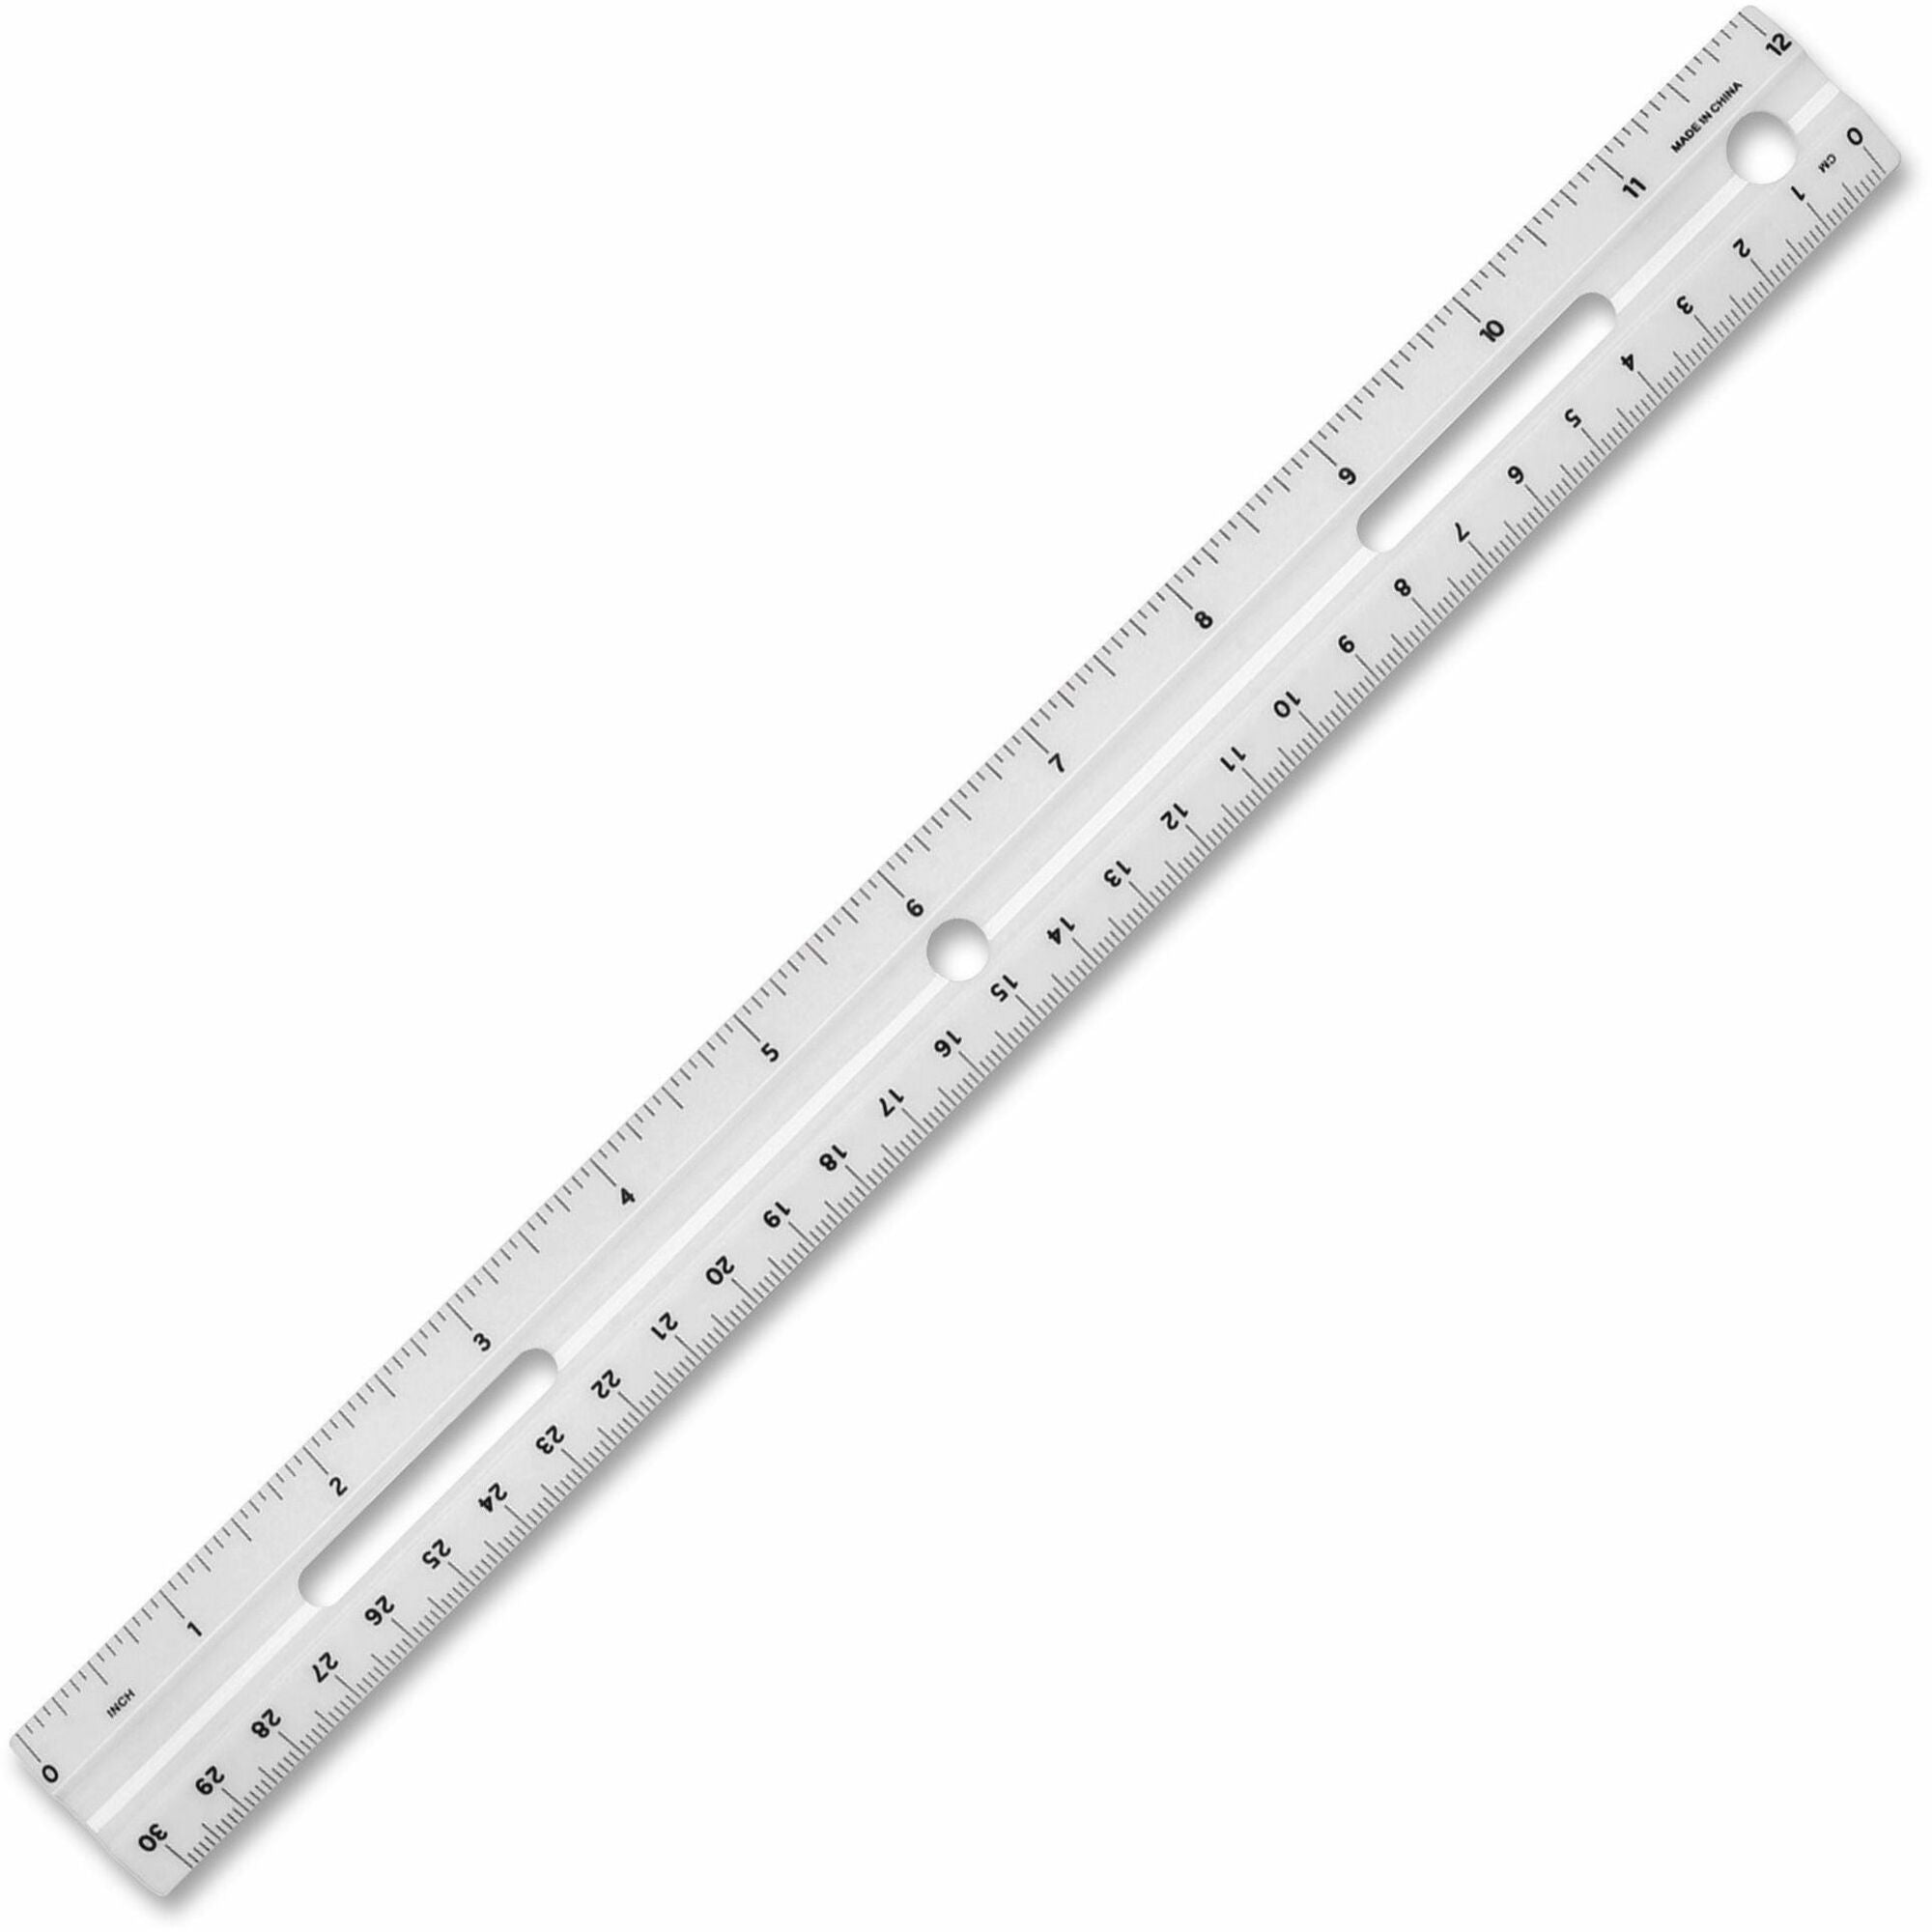 Business Source 12" Ruler - 12" Length 1.3" Width - 1/16 Graduations - Metric, Imperial Measuring System - Plastic - 1 Each - White - 